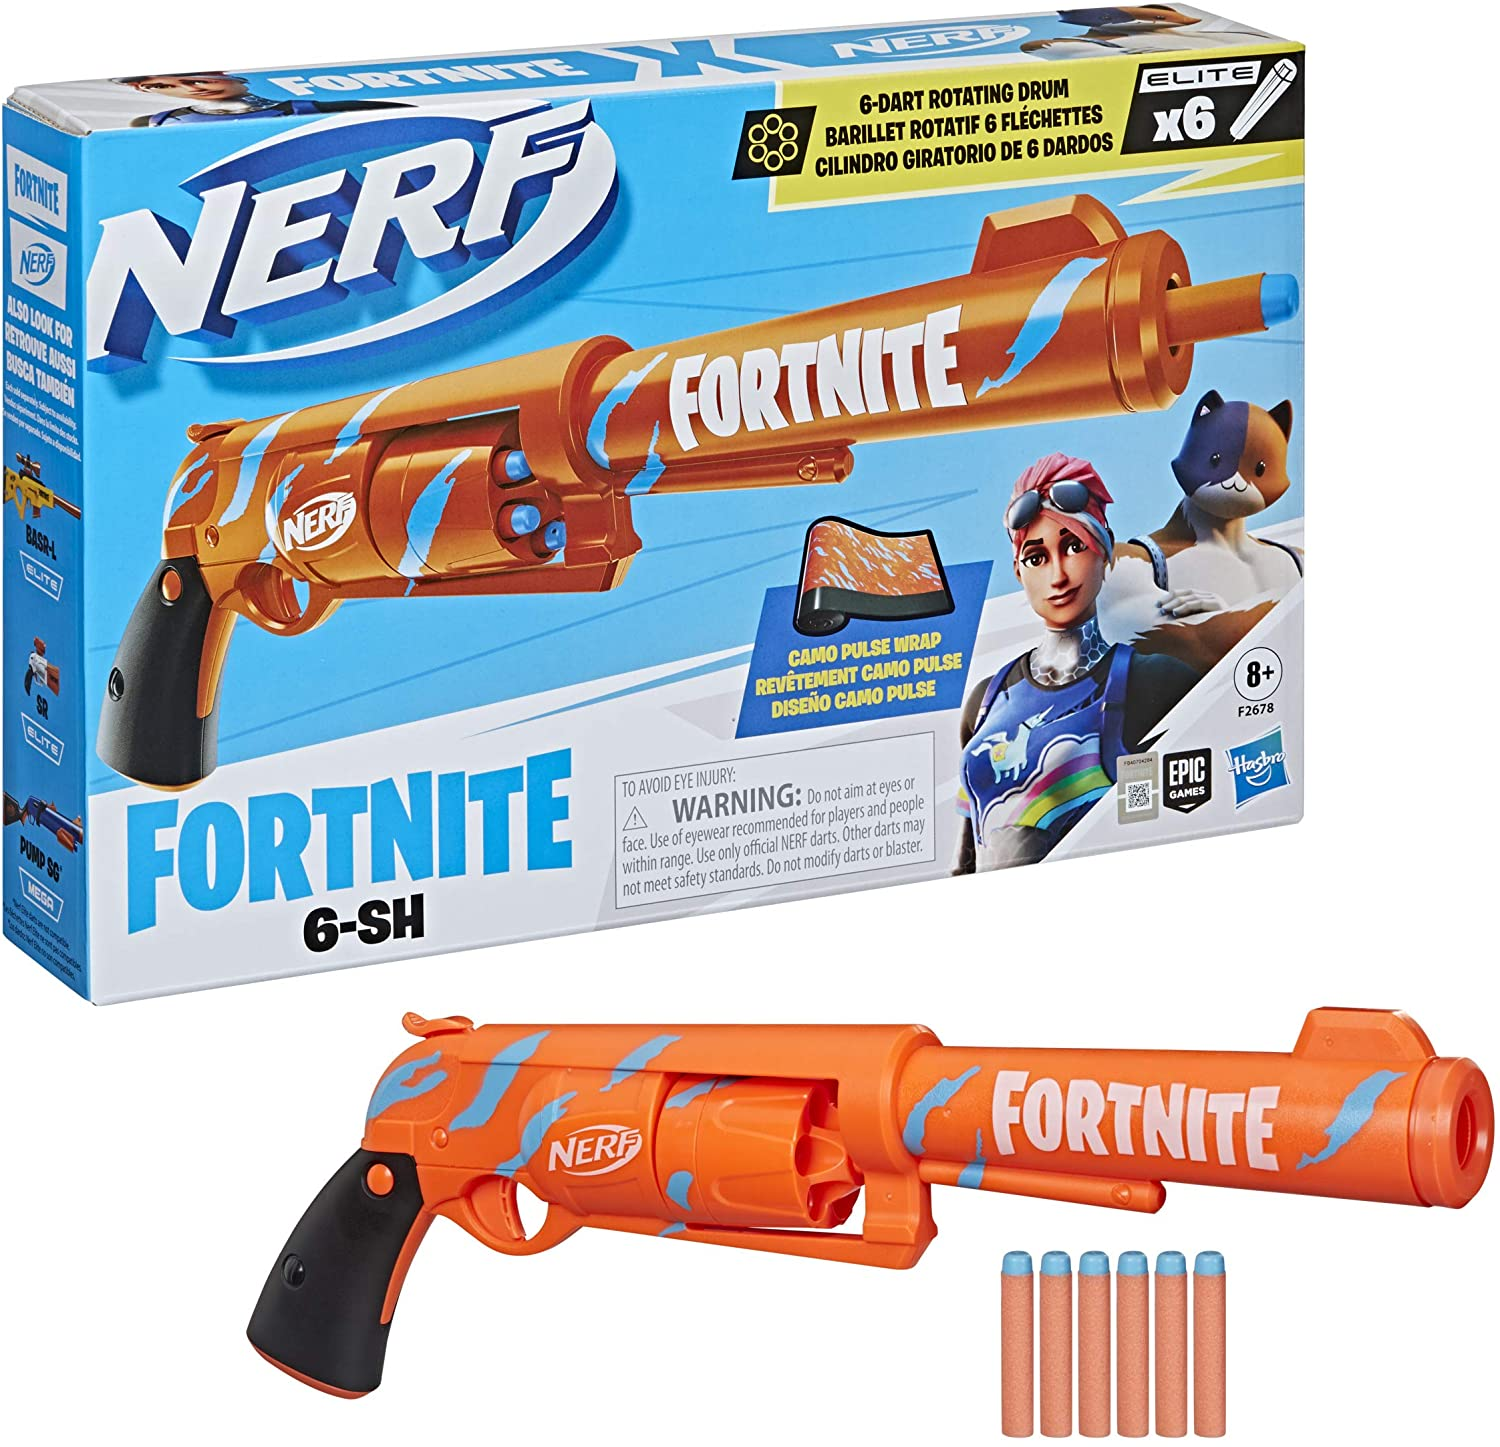 10 Cheap Nerf That are Tons of Fun The Real Deal by RetailMeNot